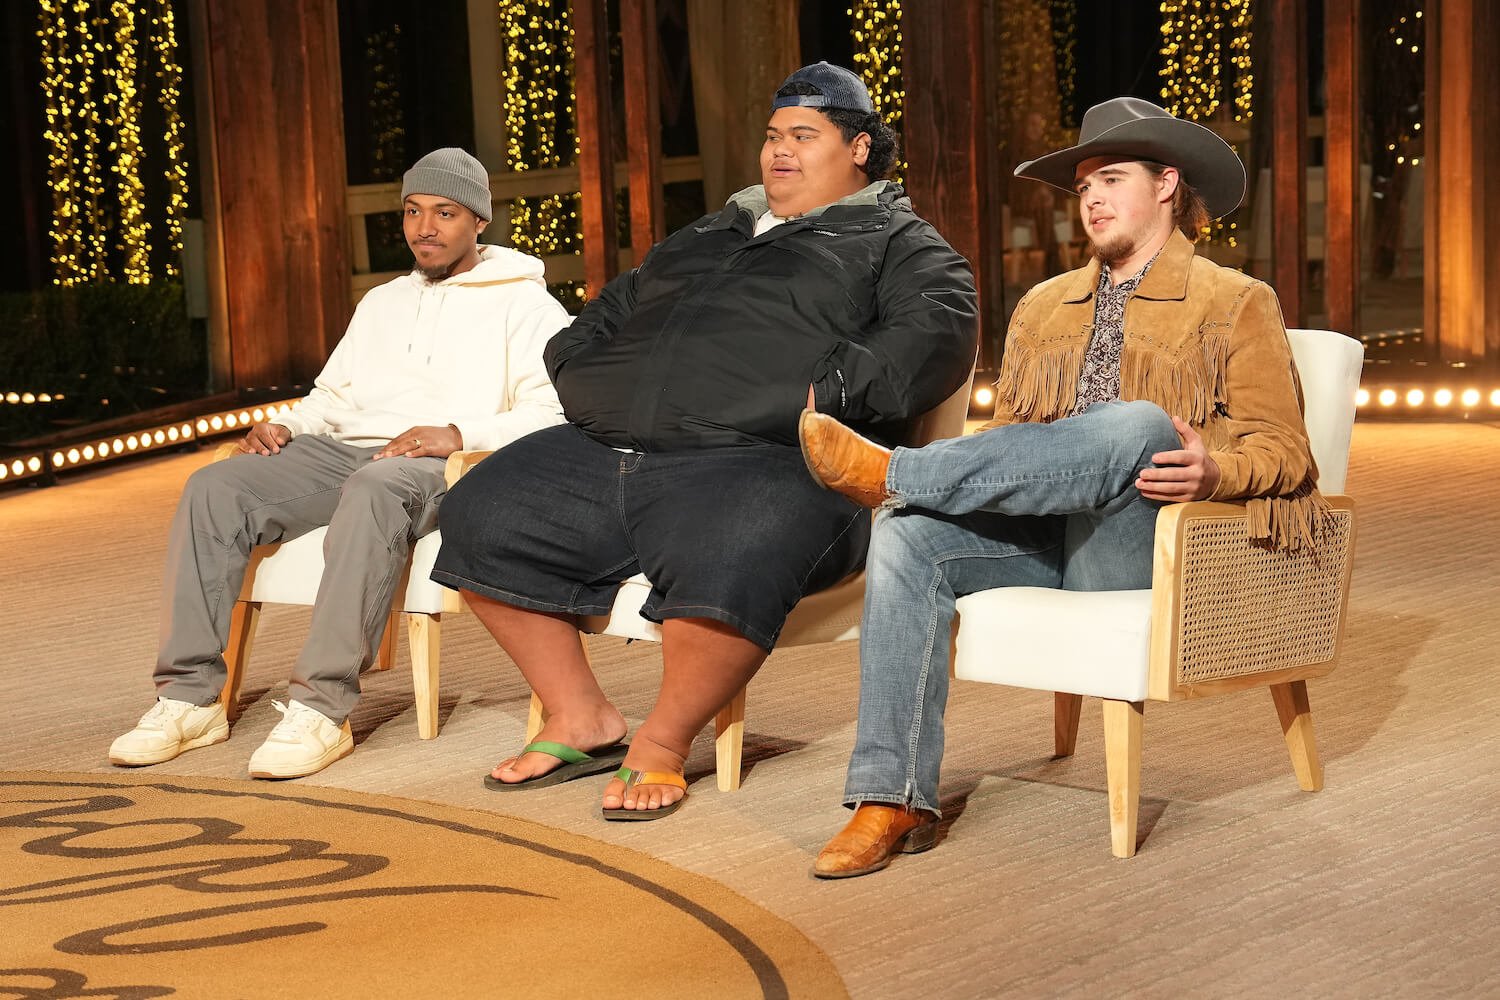 'American Idol' 2023 contestants Matt Wilson, Iam Tongi, and Colin Stough sitting next to each other. 'American Idol' 2023 spoilers note they sing in a trio.